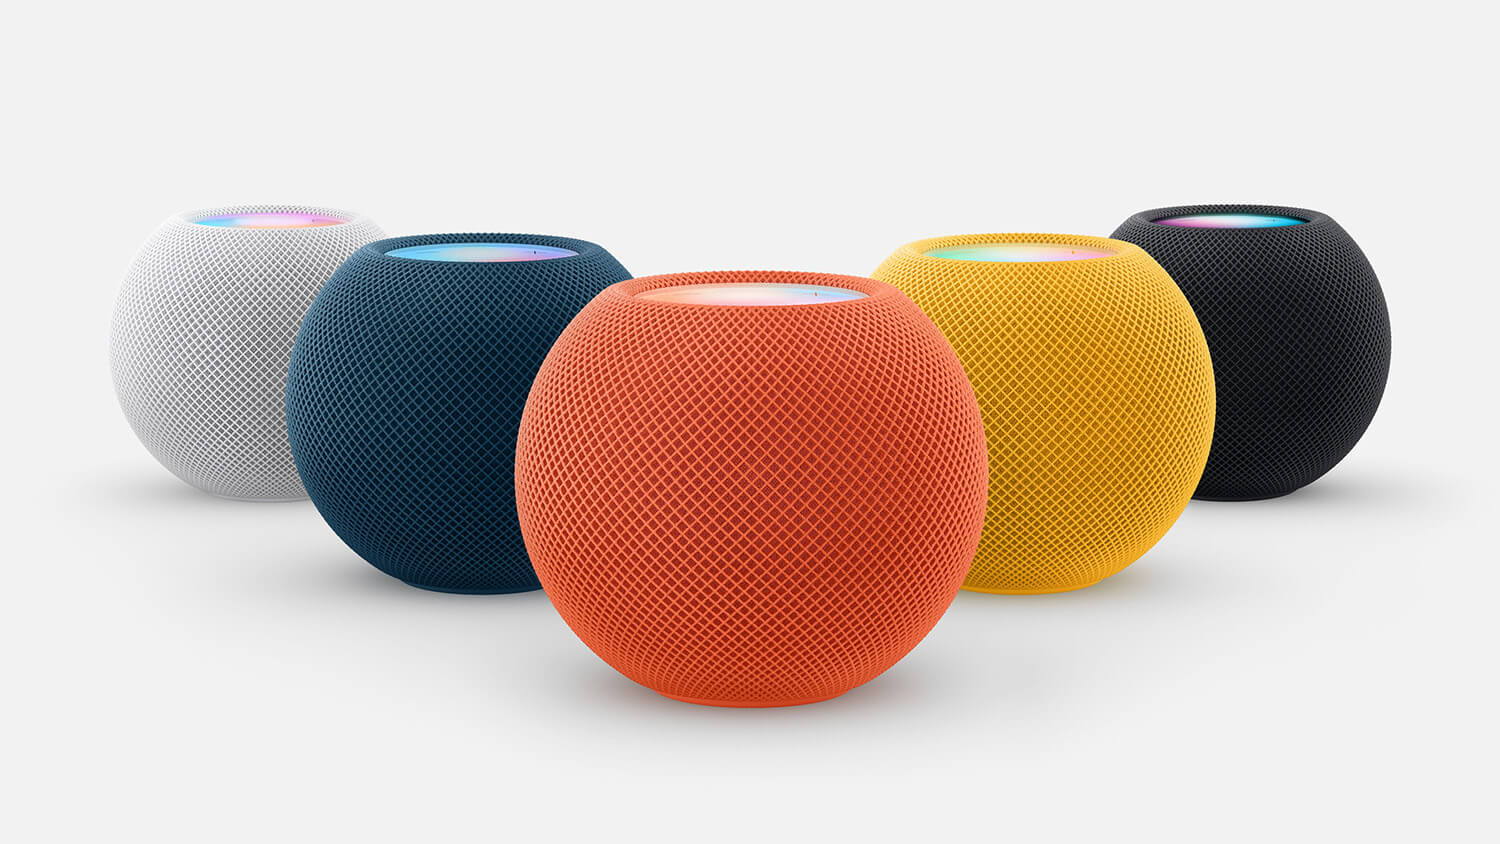 New colours of the Apple HomePod mini.